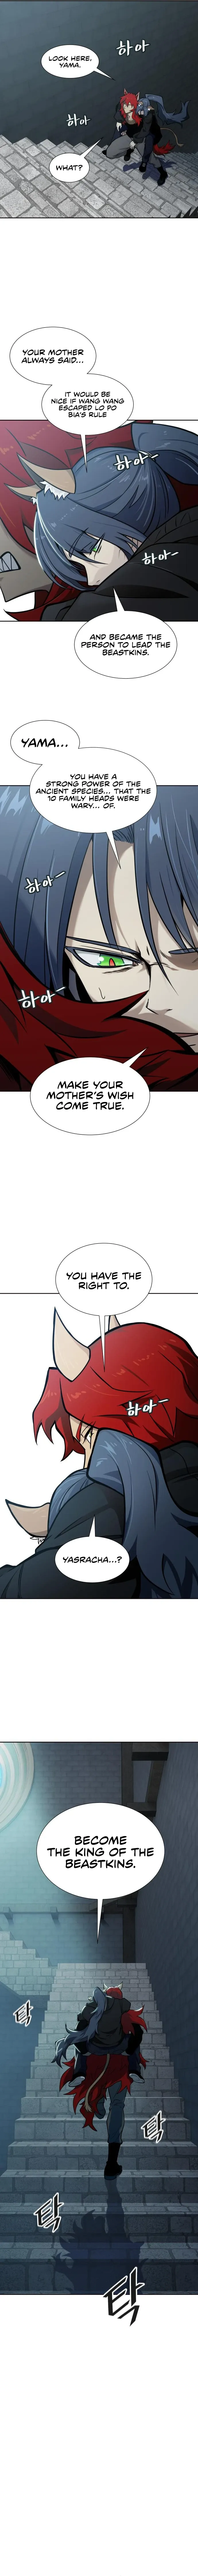 Tower of God Chapter 584 page 24